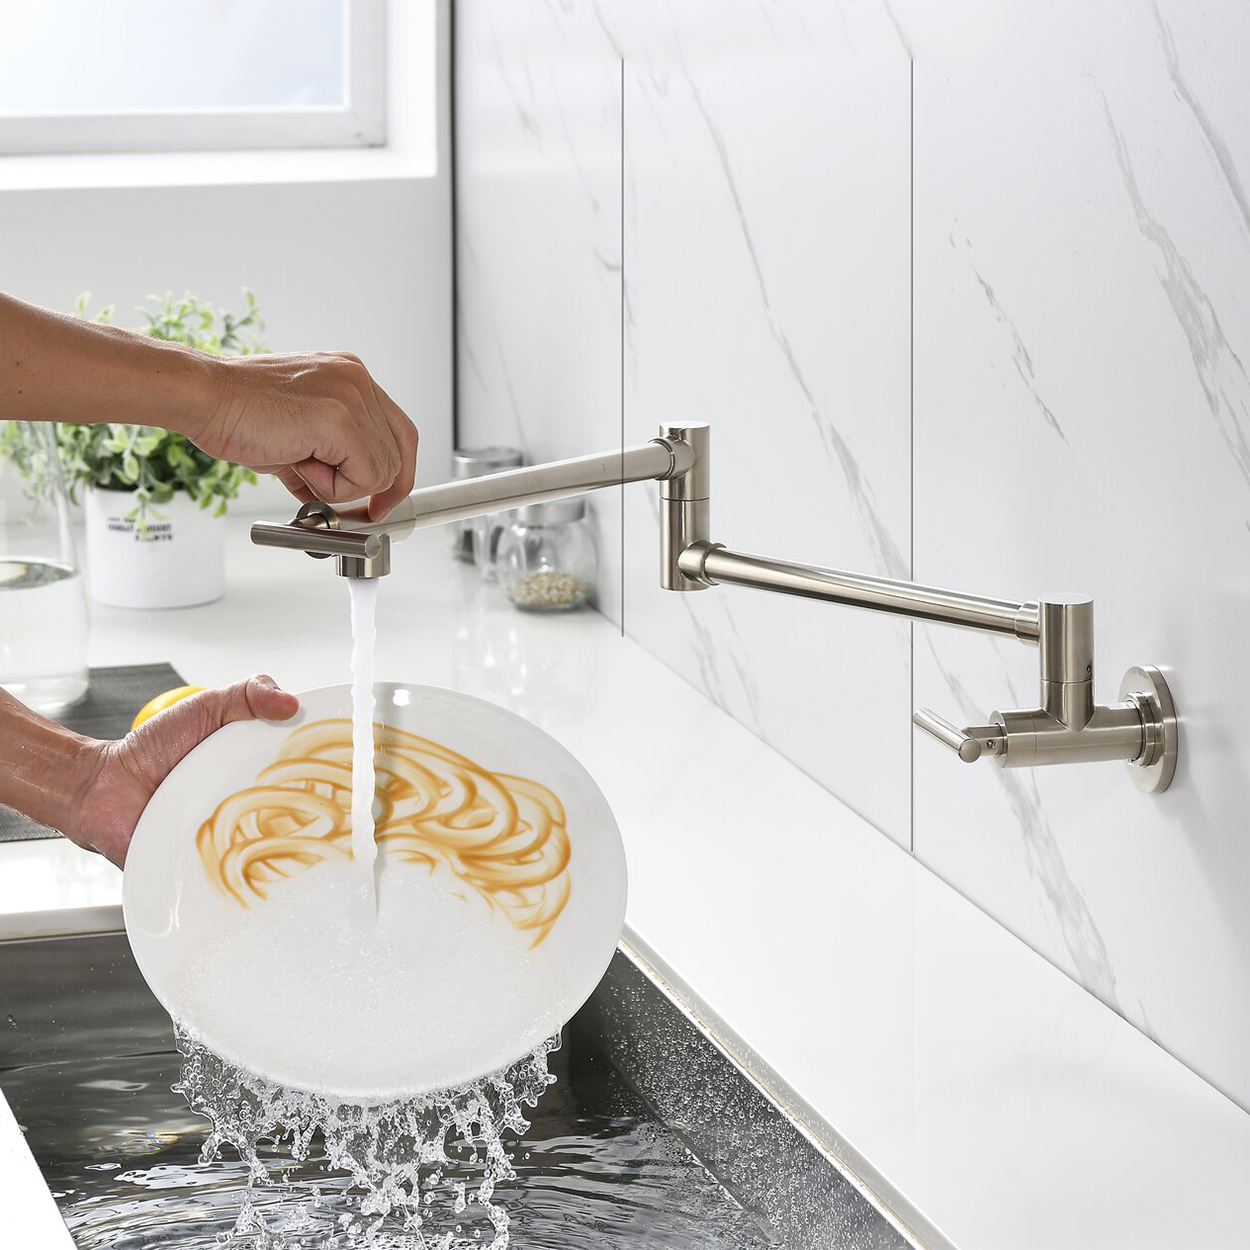 Modern Brass Made Wall Mount Retractable Single Hole brushednickel surface Pot filler with Two Handles